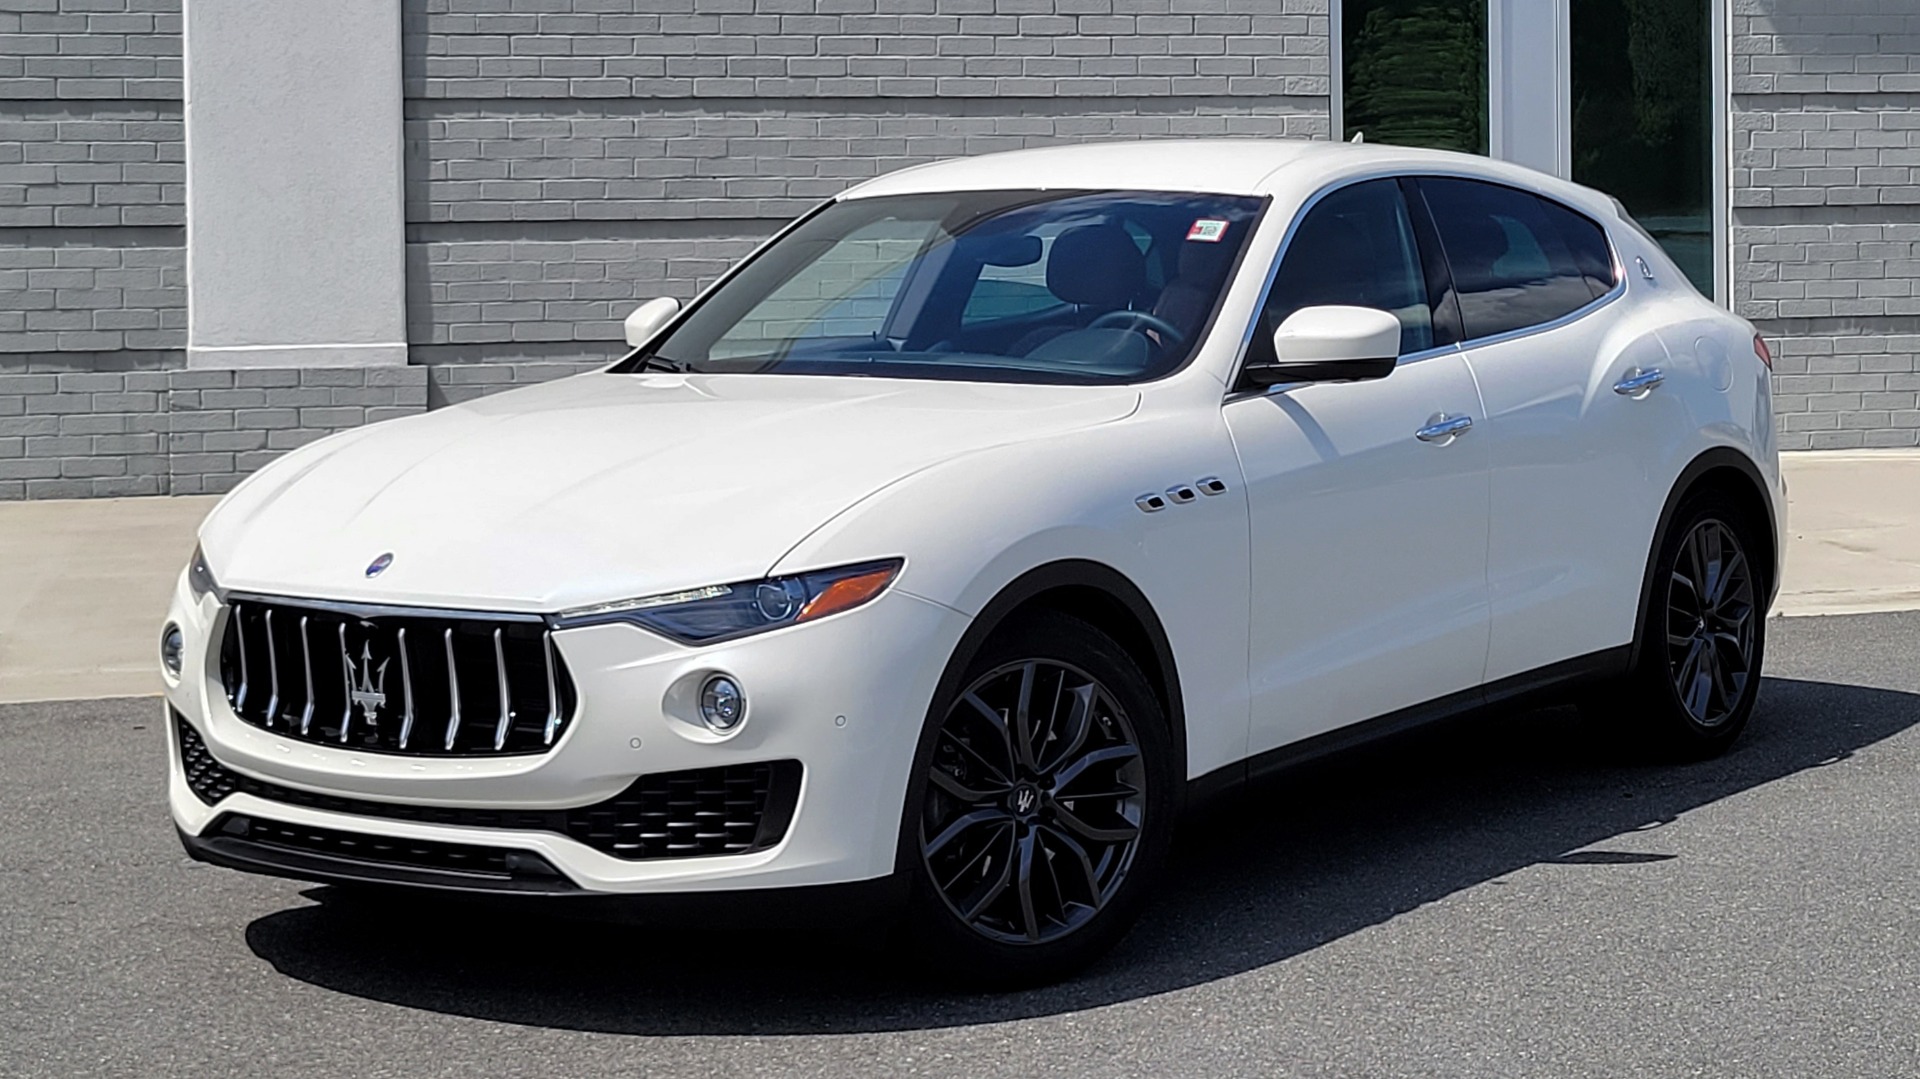 Used 2018 Maserati LEVANTE 3.0L 345HP SUV / 8-SPD / PREMIUM / BSA / NAV / 20IN WHLS / REARVIEW for sale $50,495 at Formula Imports in Charlotte NC 28227 1